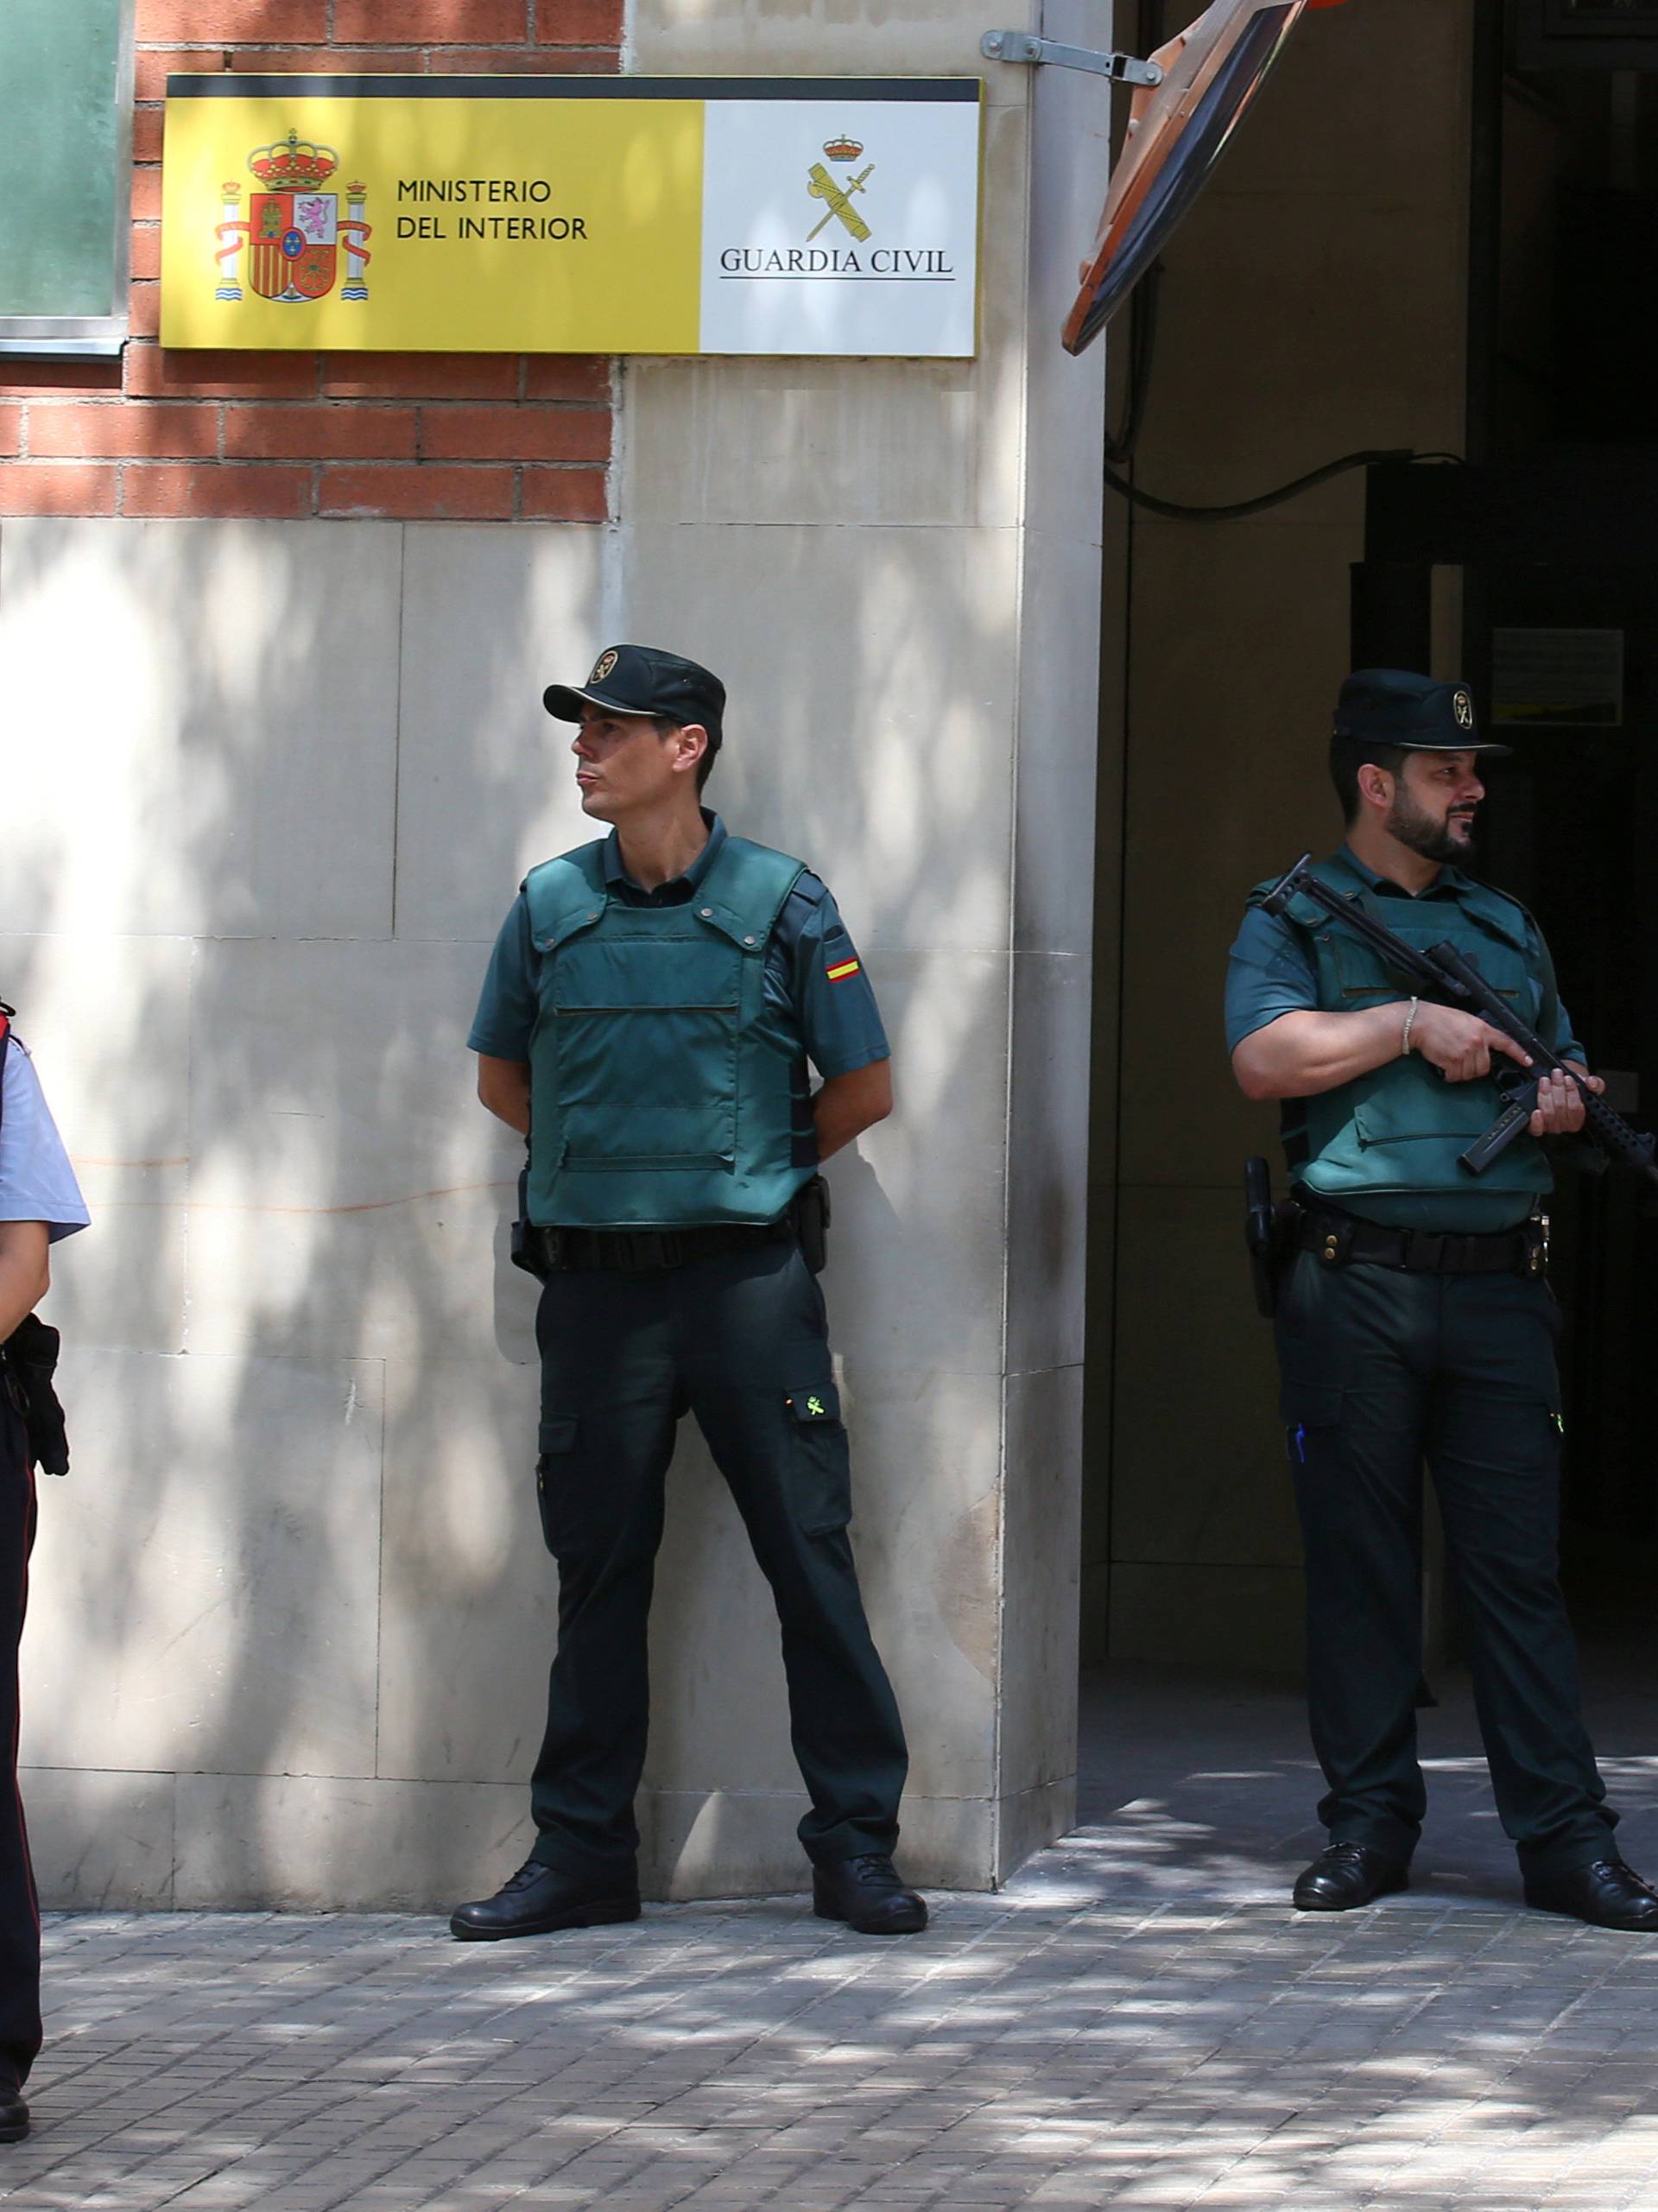 FILE PHOTO: Mossos d'Esquadra officers (Catalan Regional Police) stand guard in front of Civil Guard headquarters during a protest in Barcelona